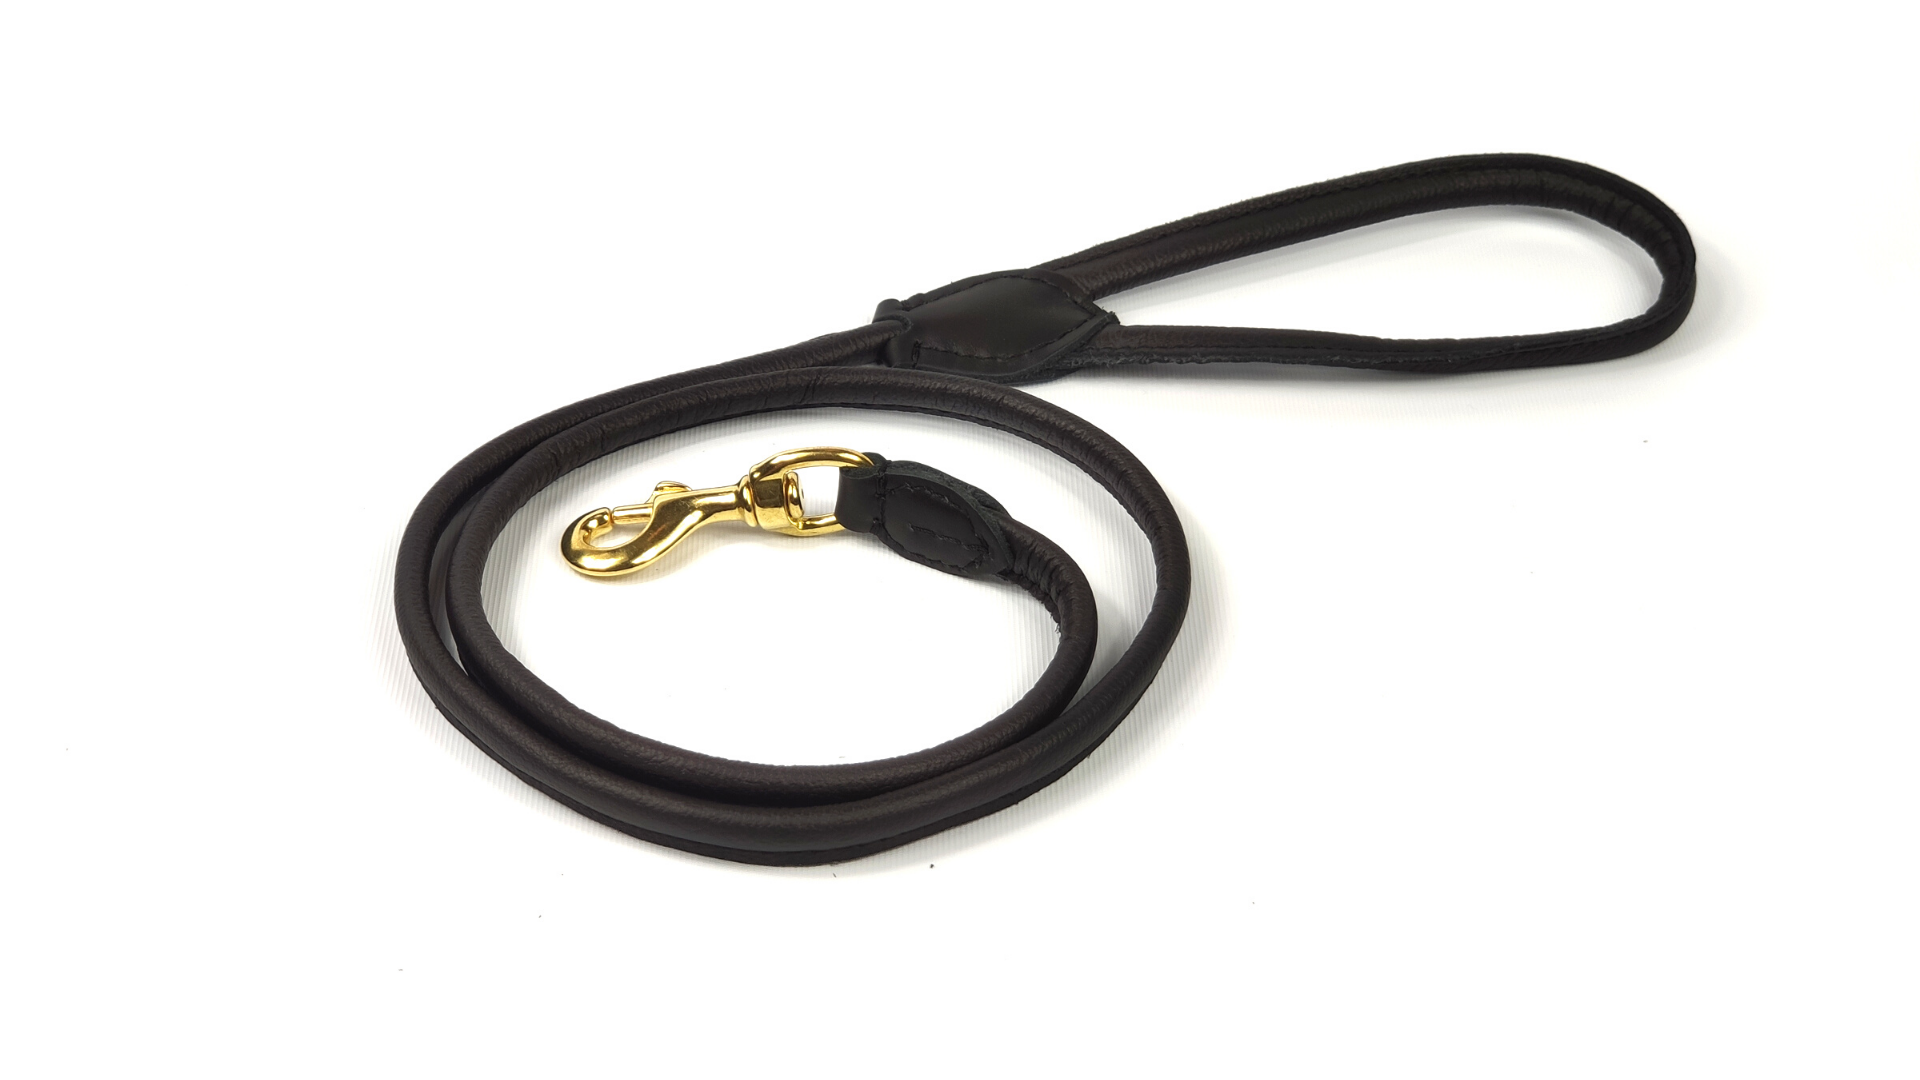 Hillfoot Rolled Leather Dog Leash - Black